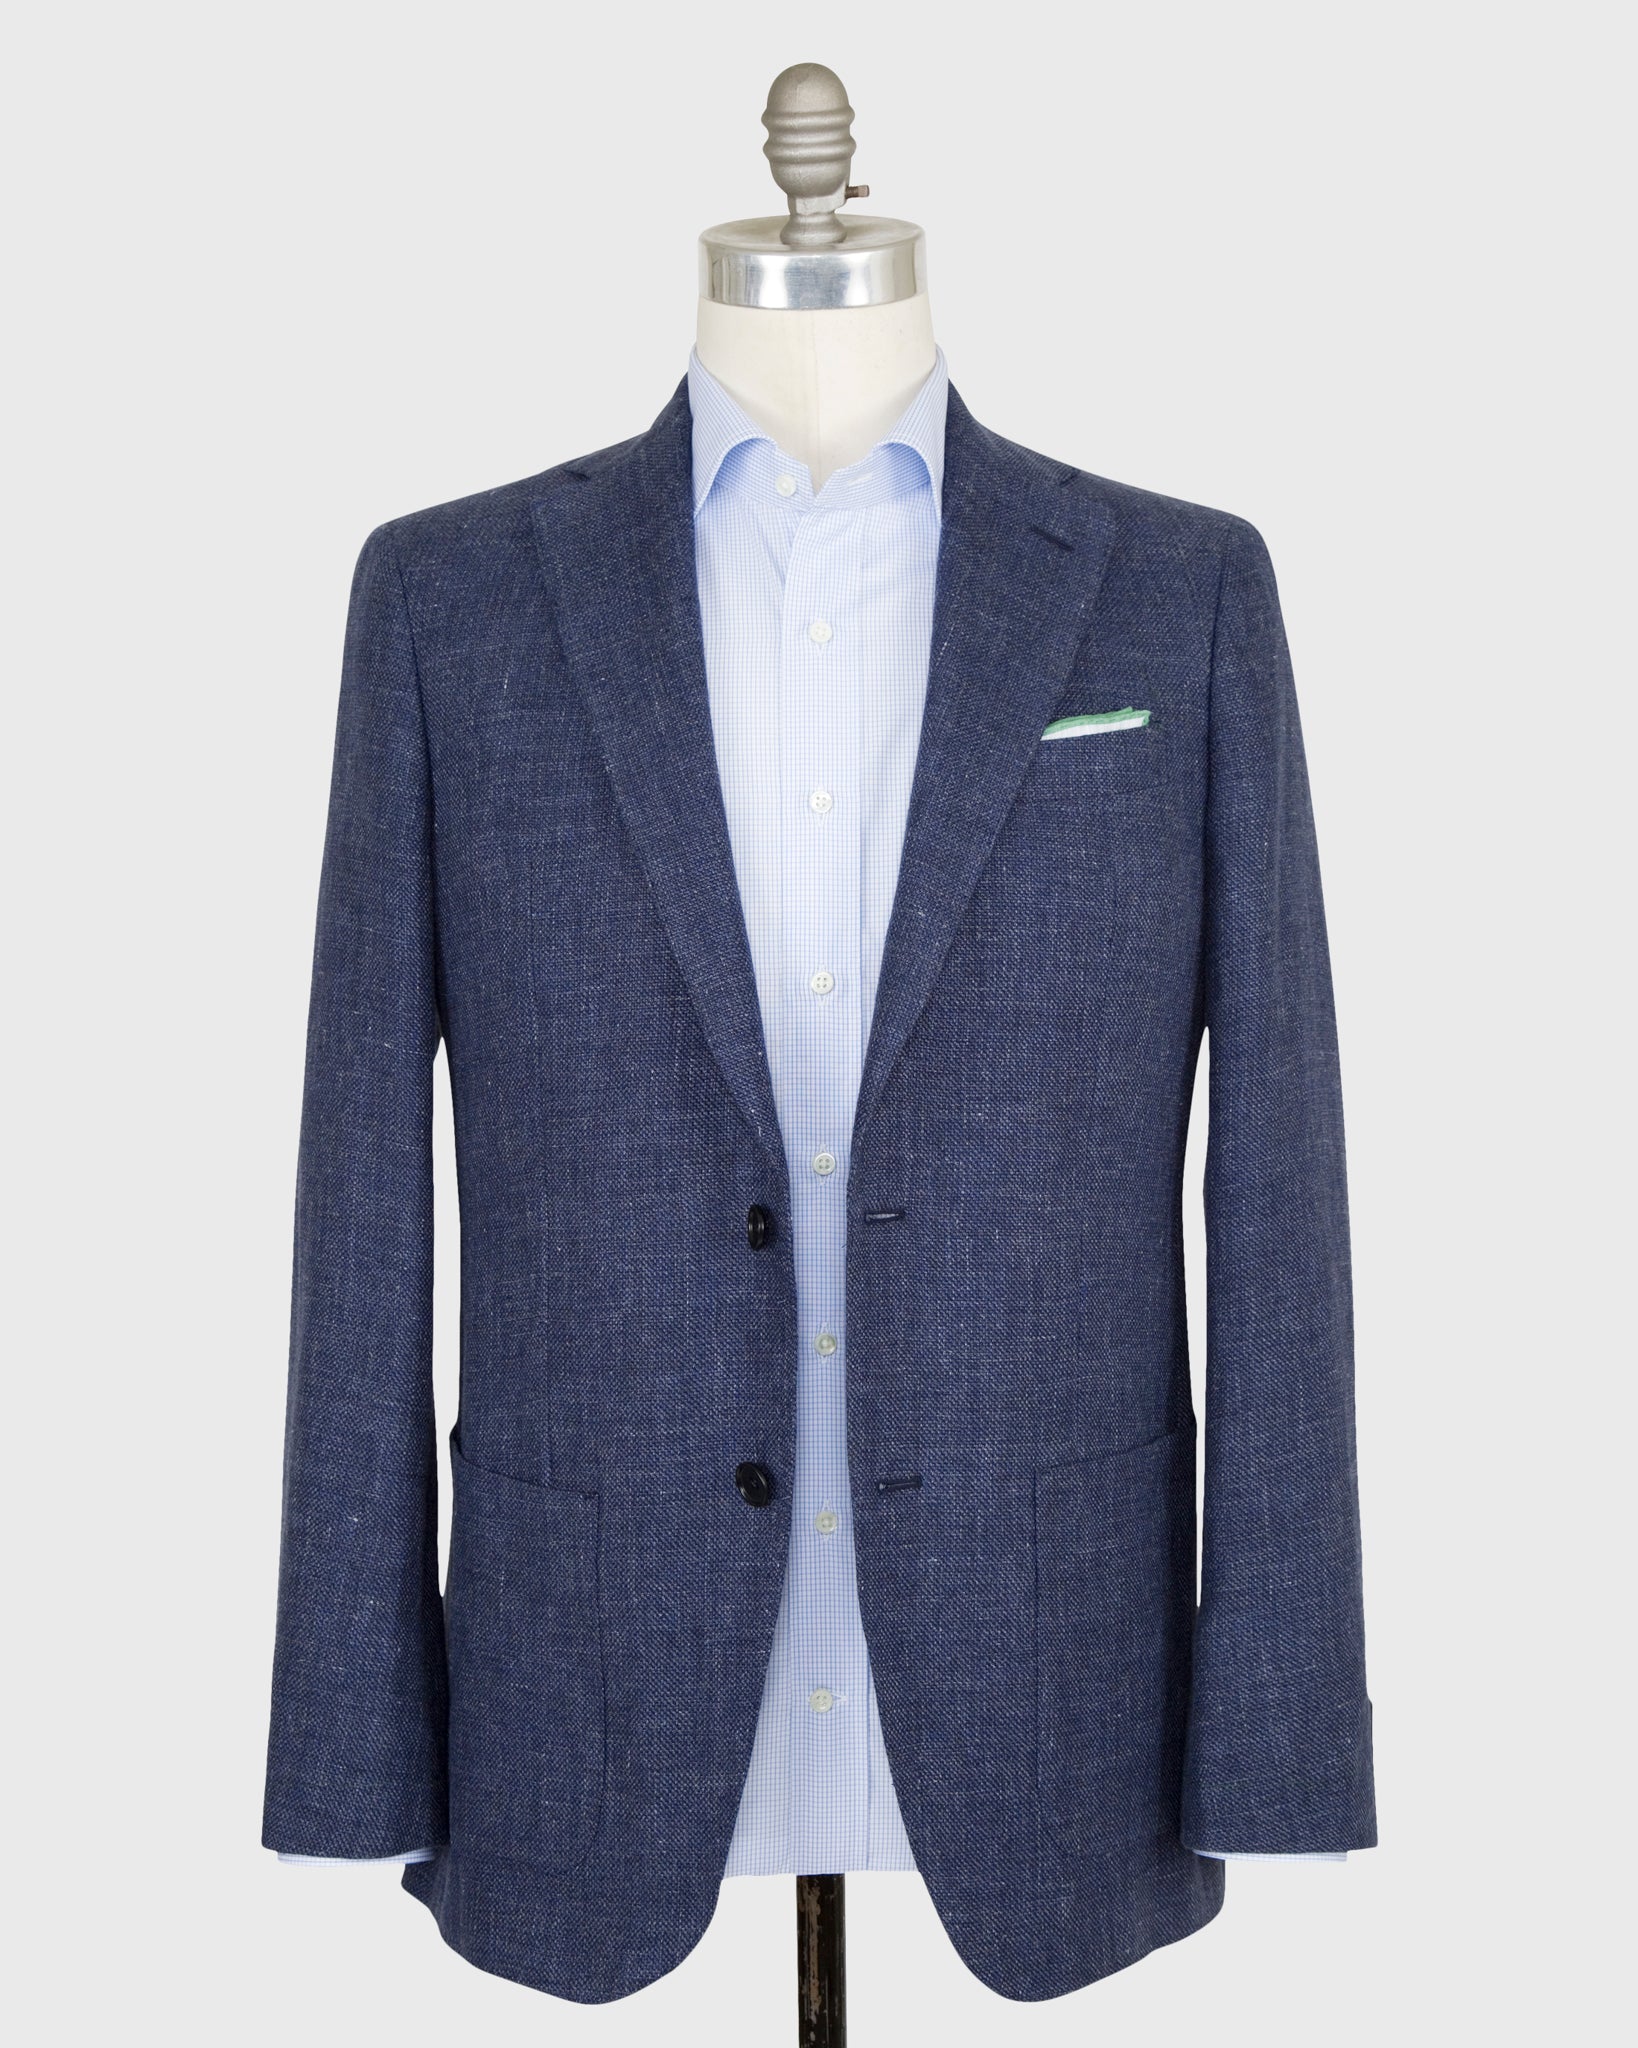 Kincaid No. 2 Jacket in Blue Mix Linen/Wool Hopsack